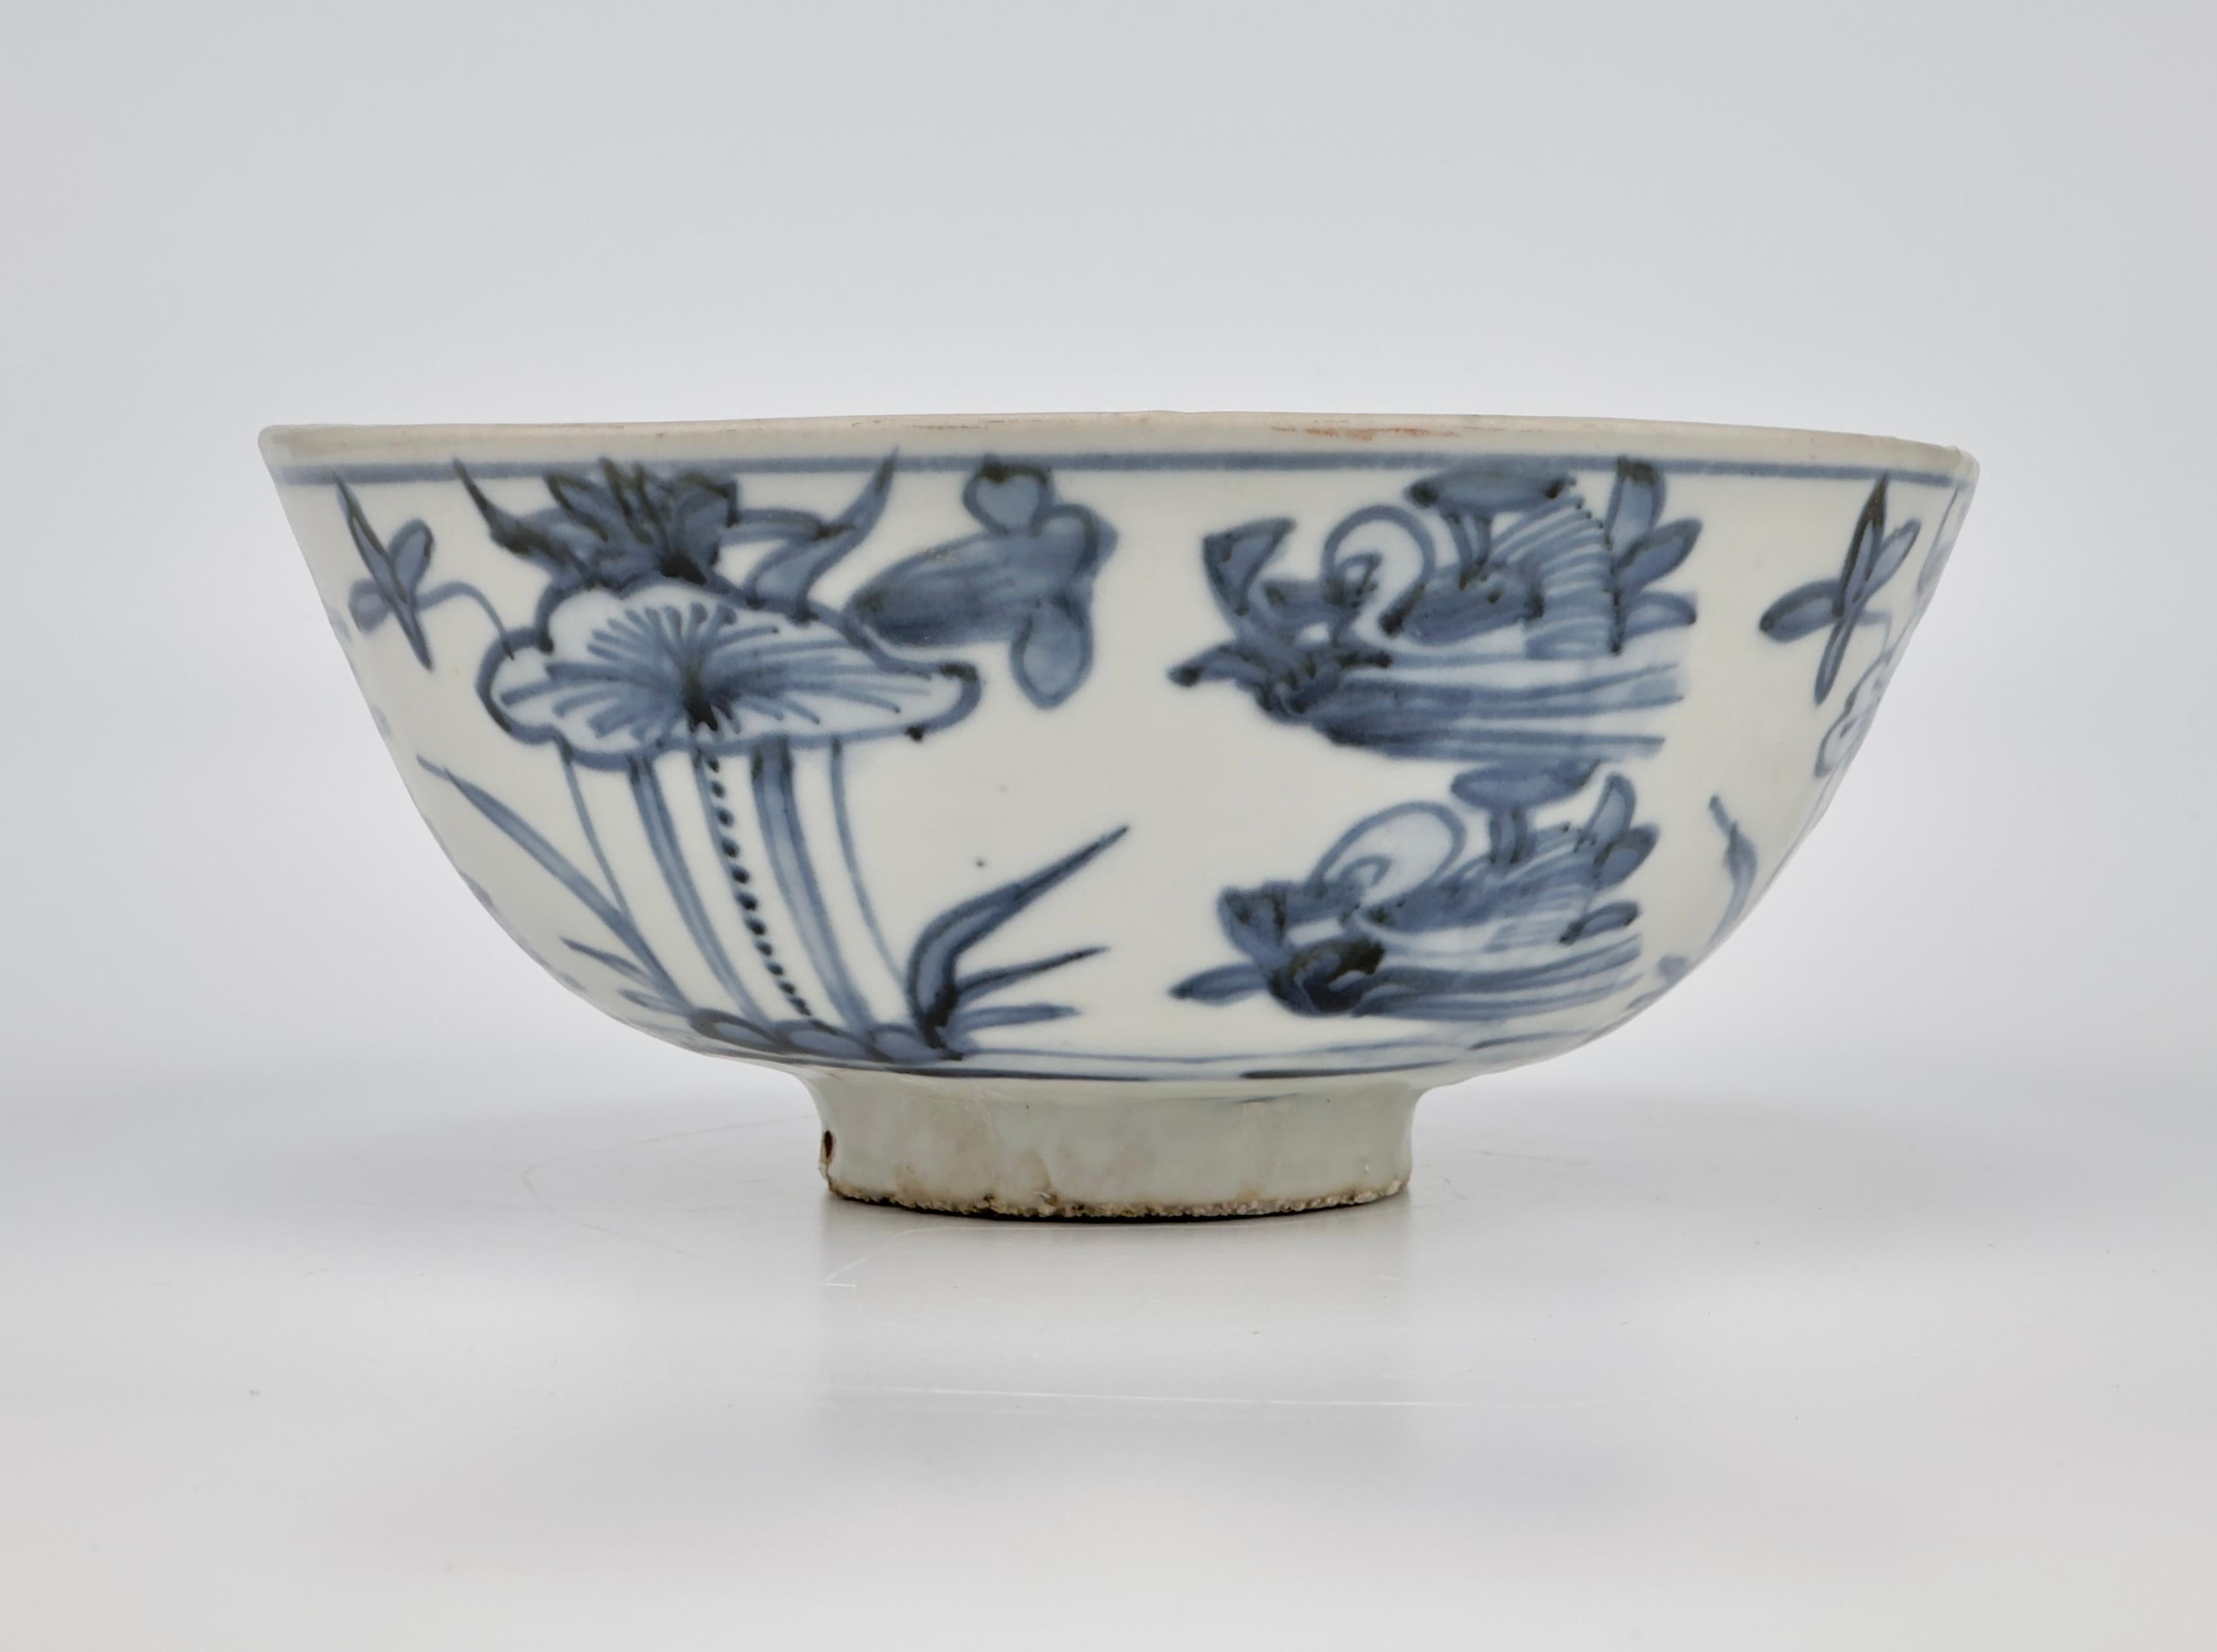 Bowl from the late Ming dynasty cargo. An identical piece is included on page 136 of the Bin Thuan catalog titled 'The Age of Discovery: Asian Ceramics Found Along the Maritime Silk Road'.

Period: Ming Dynasty (16-17th century)
Type: Bowl
Medium :